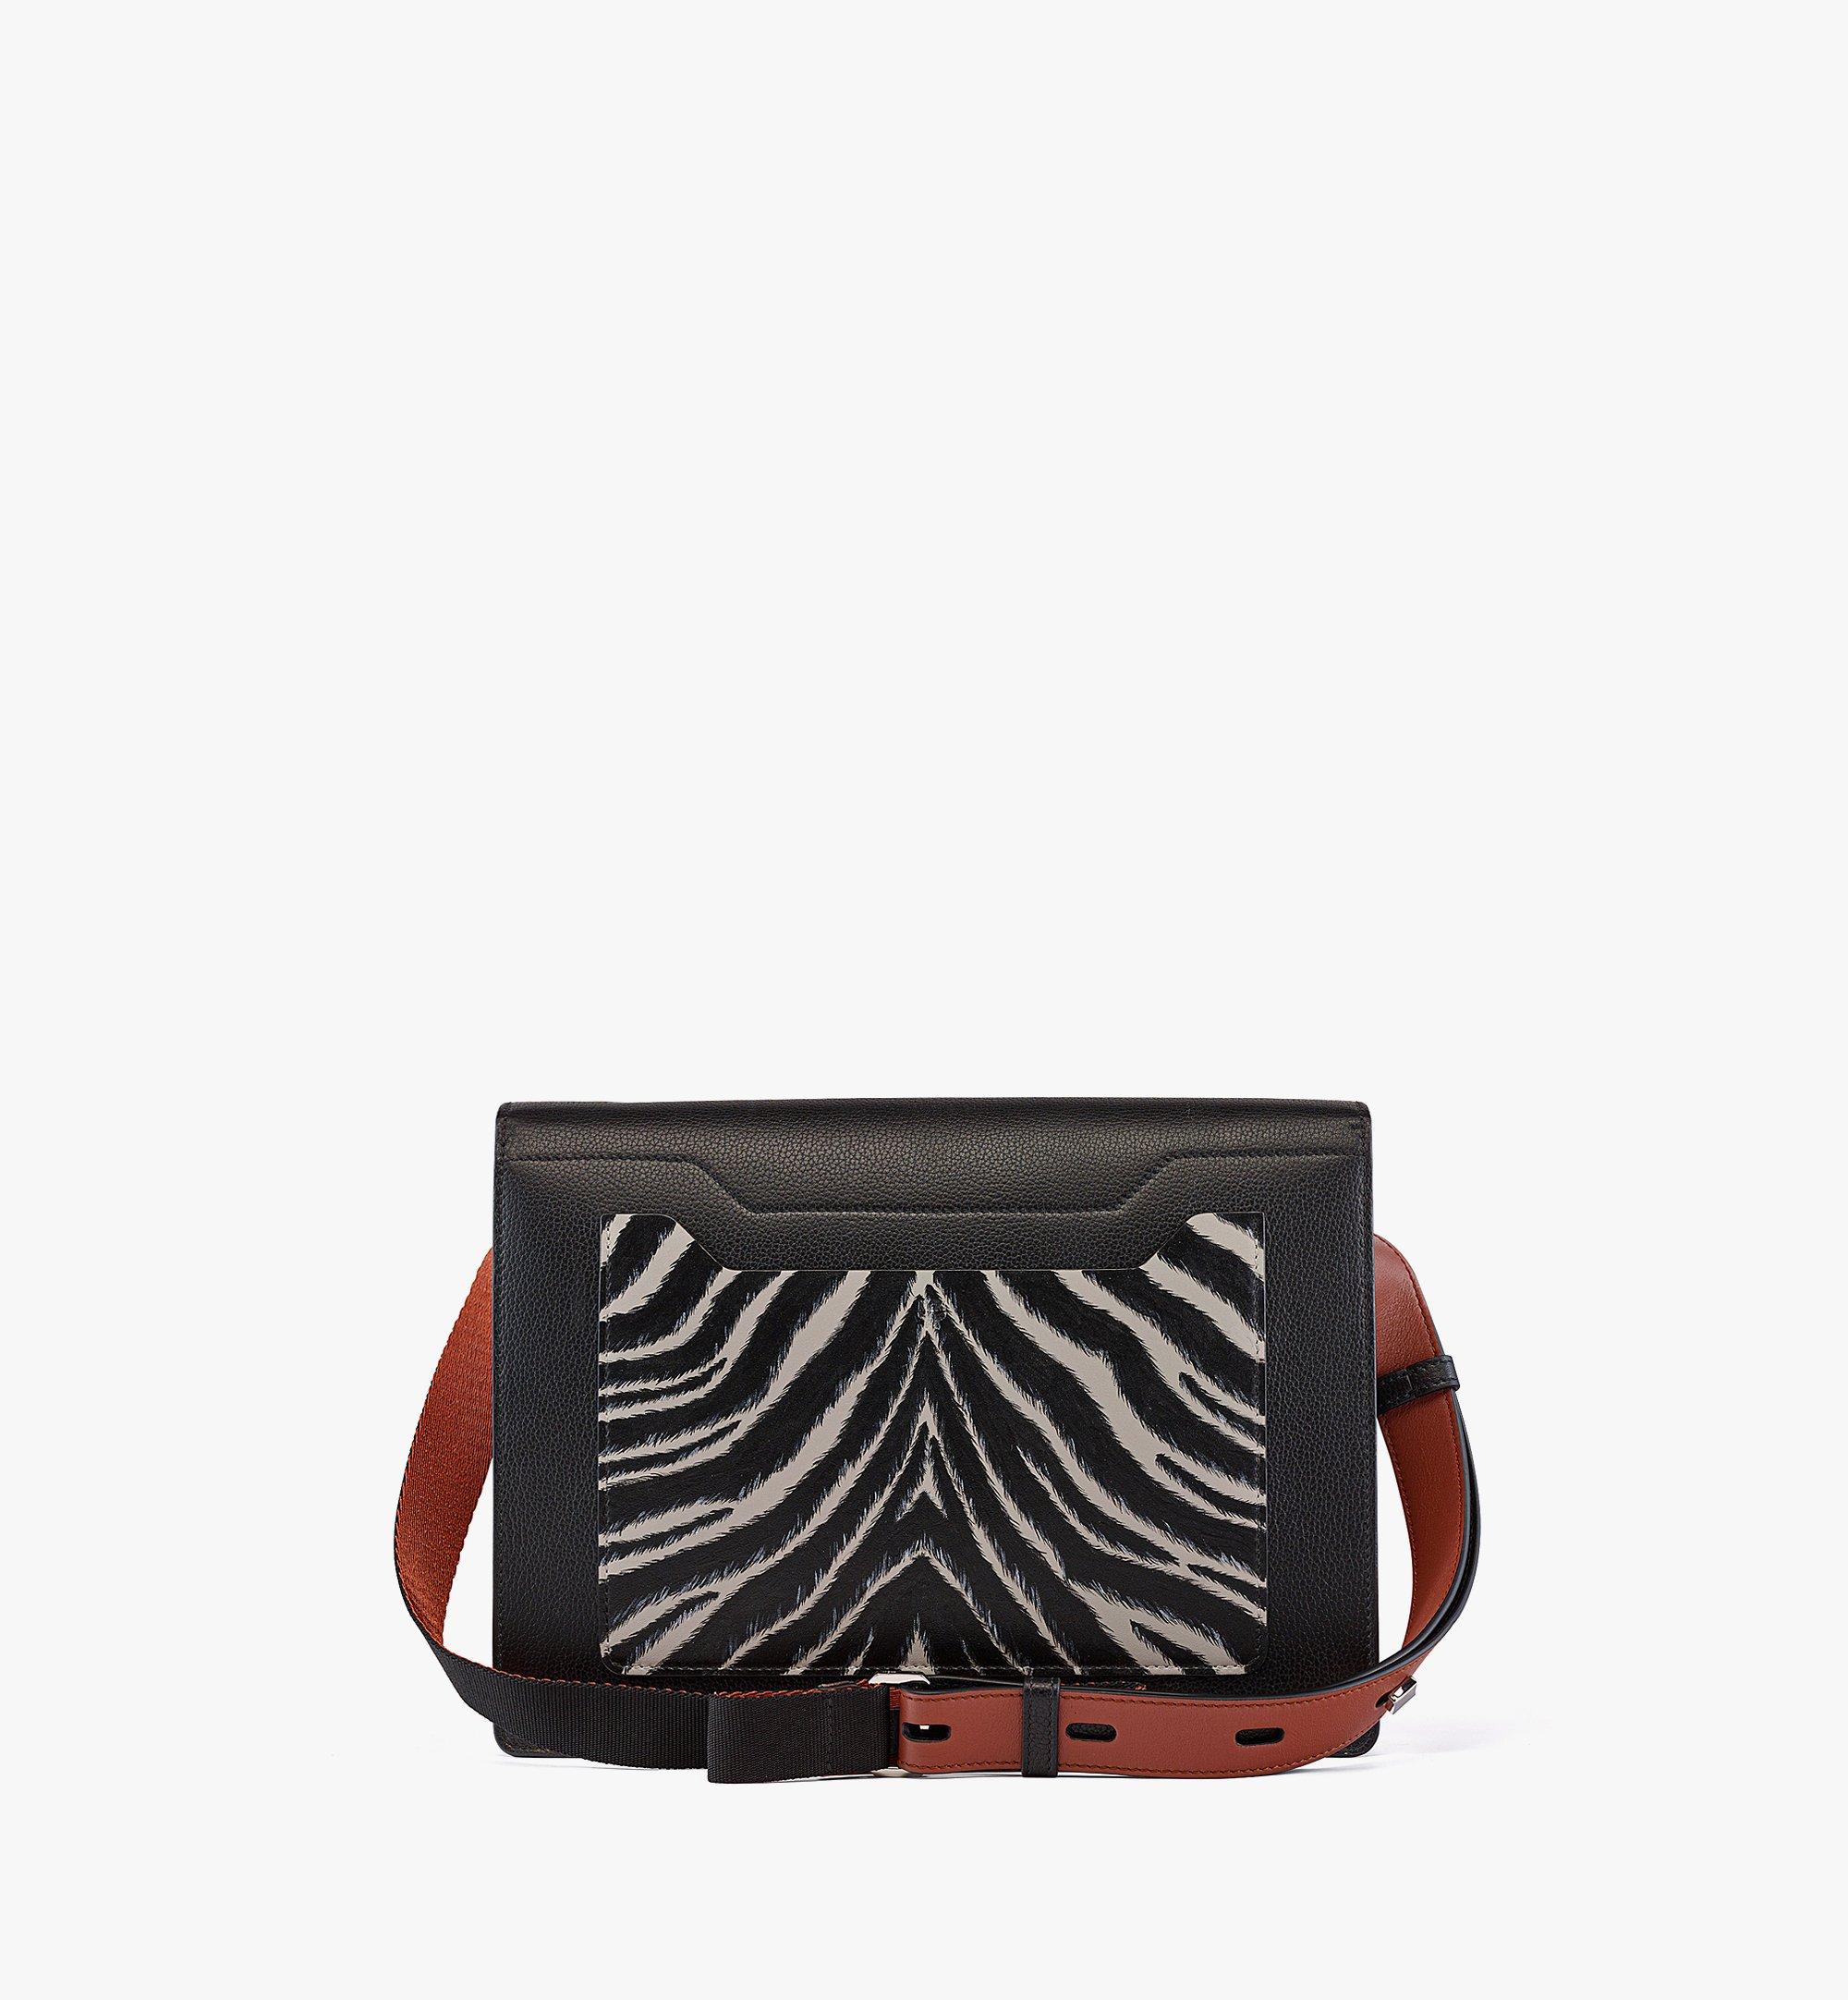 MCM Upcycling Project Tiger Milano Shoulder Bag in Calf Leather Black MWSCSUP01BK001 Alternate View 3